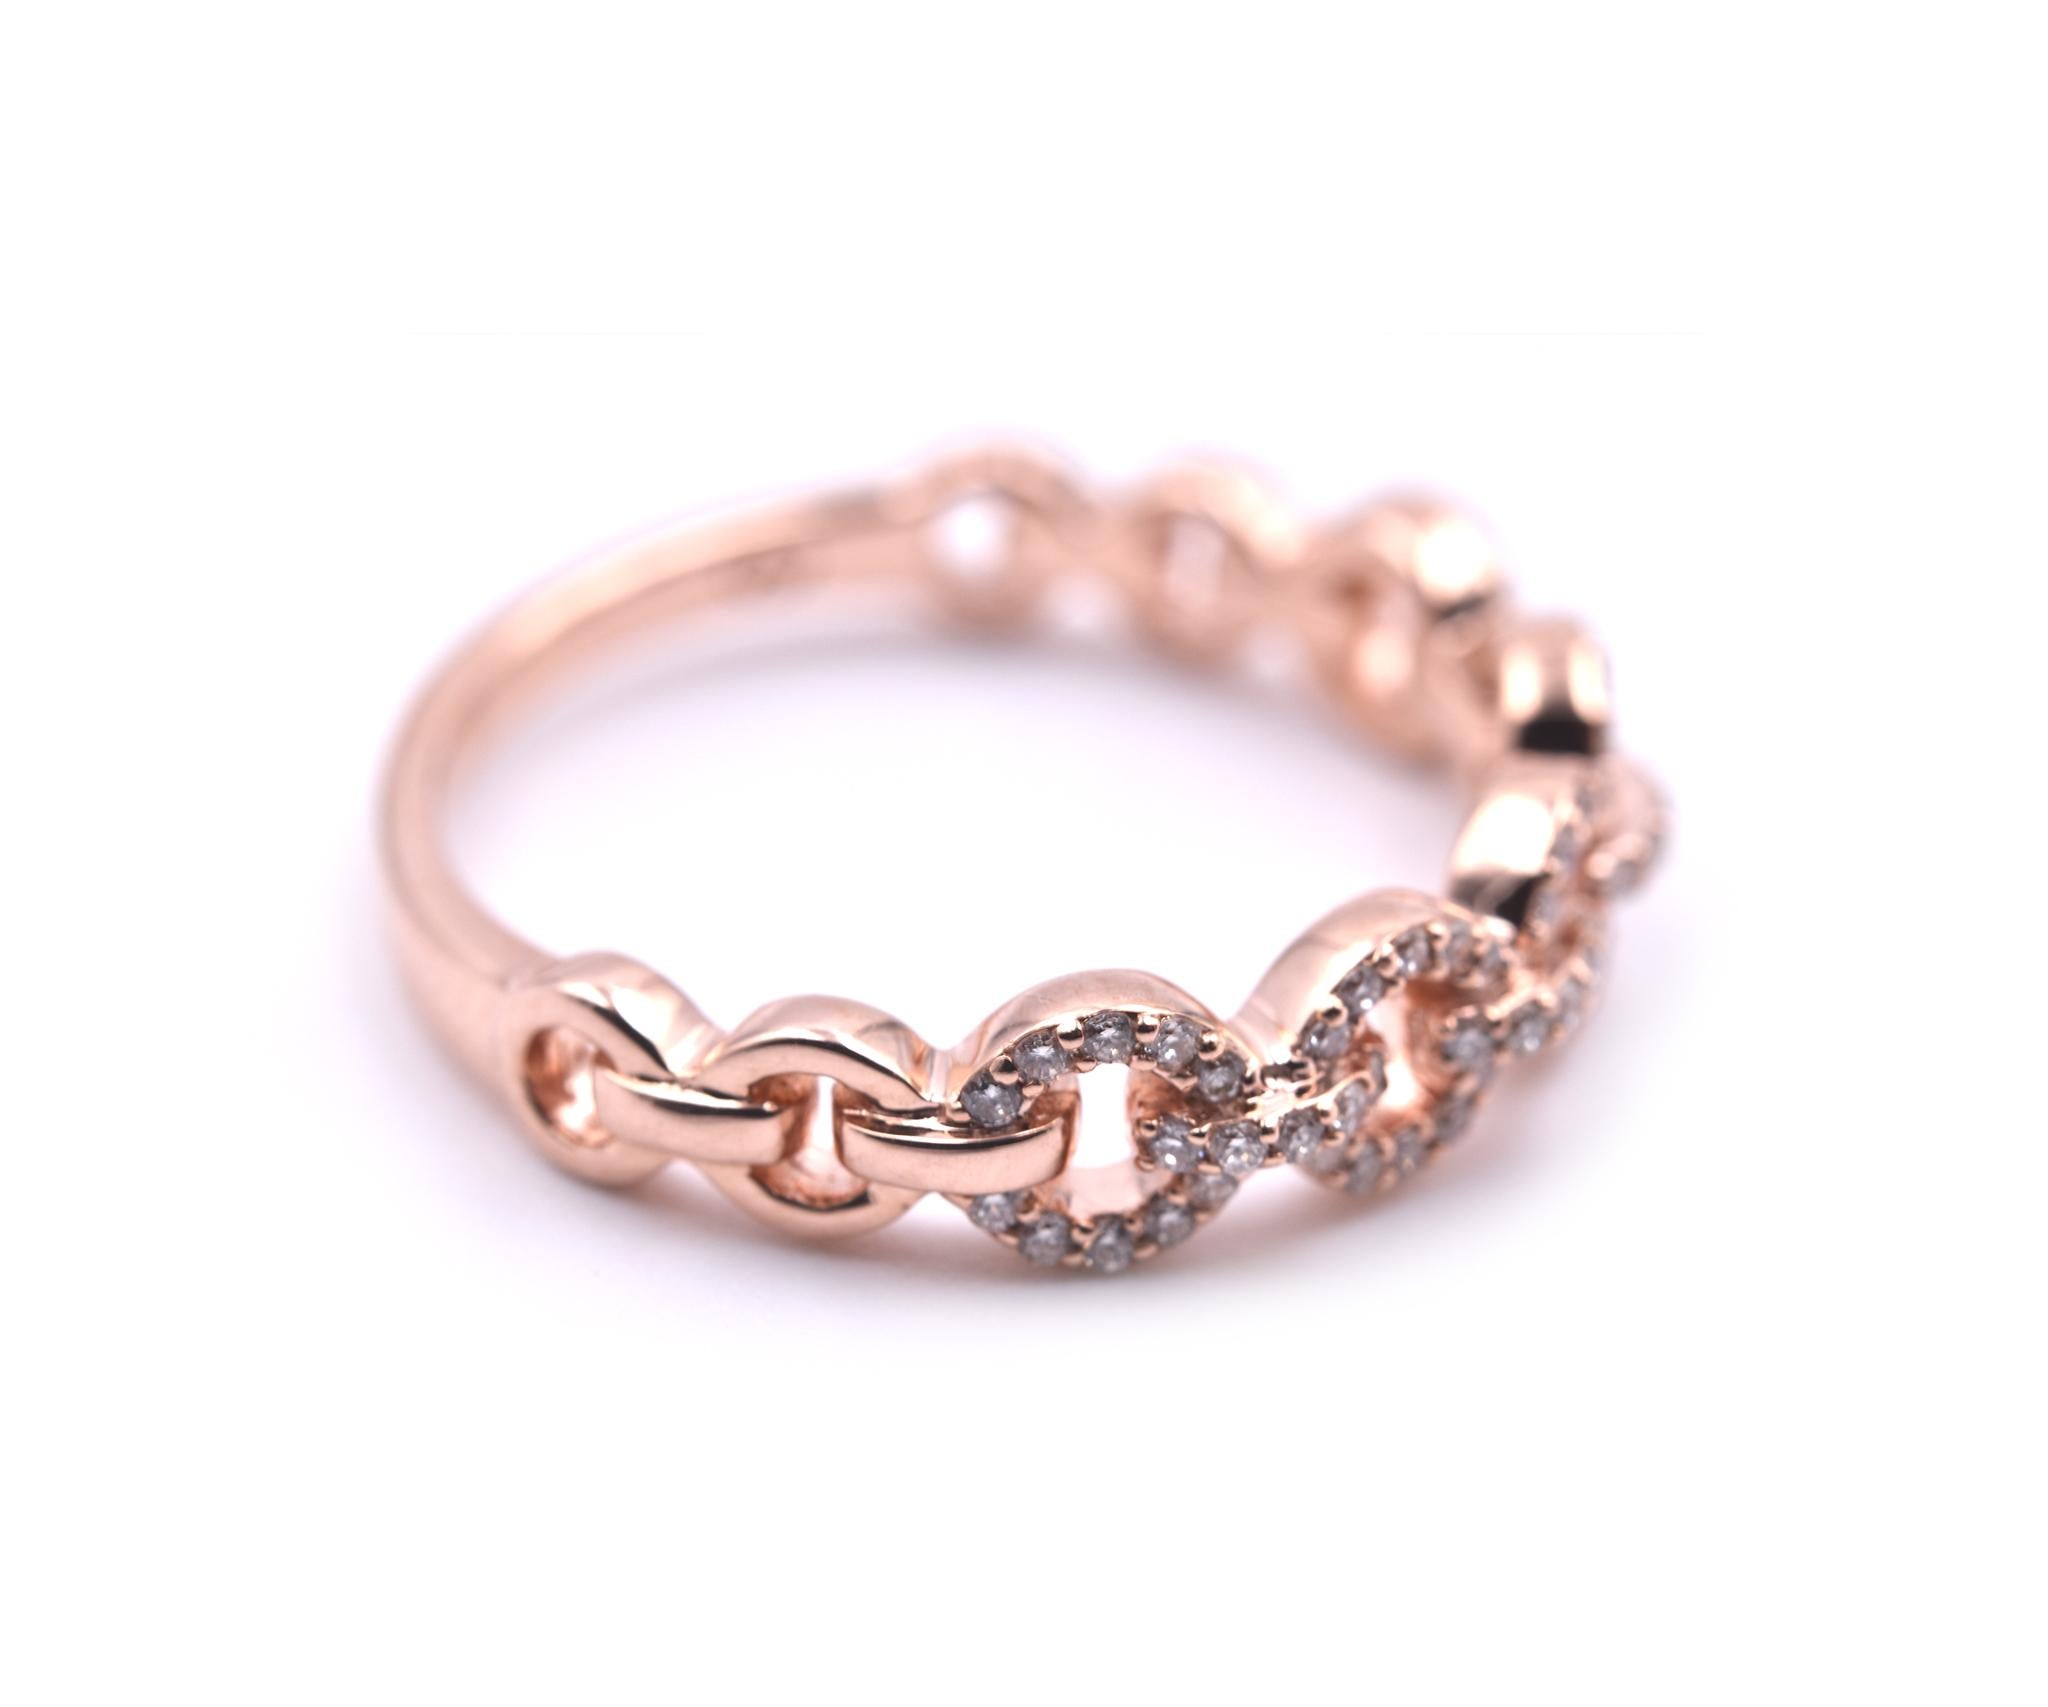 Designer: custom design
Material: 14k rose gold
Diamonds: 70 round brilliant cut = .25cttw
Color: G
Clarity: VS
Ring size: 7 ¼ (please allow two additional shipping days for sizing requests)
Weight: 3.0 grams 
